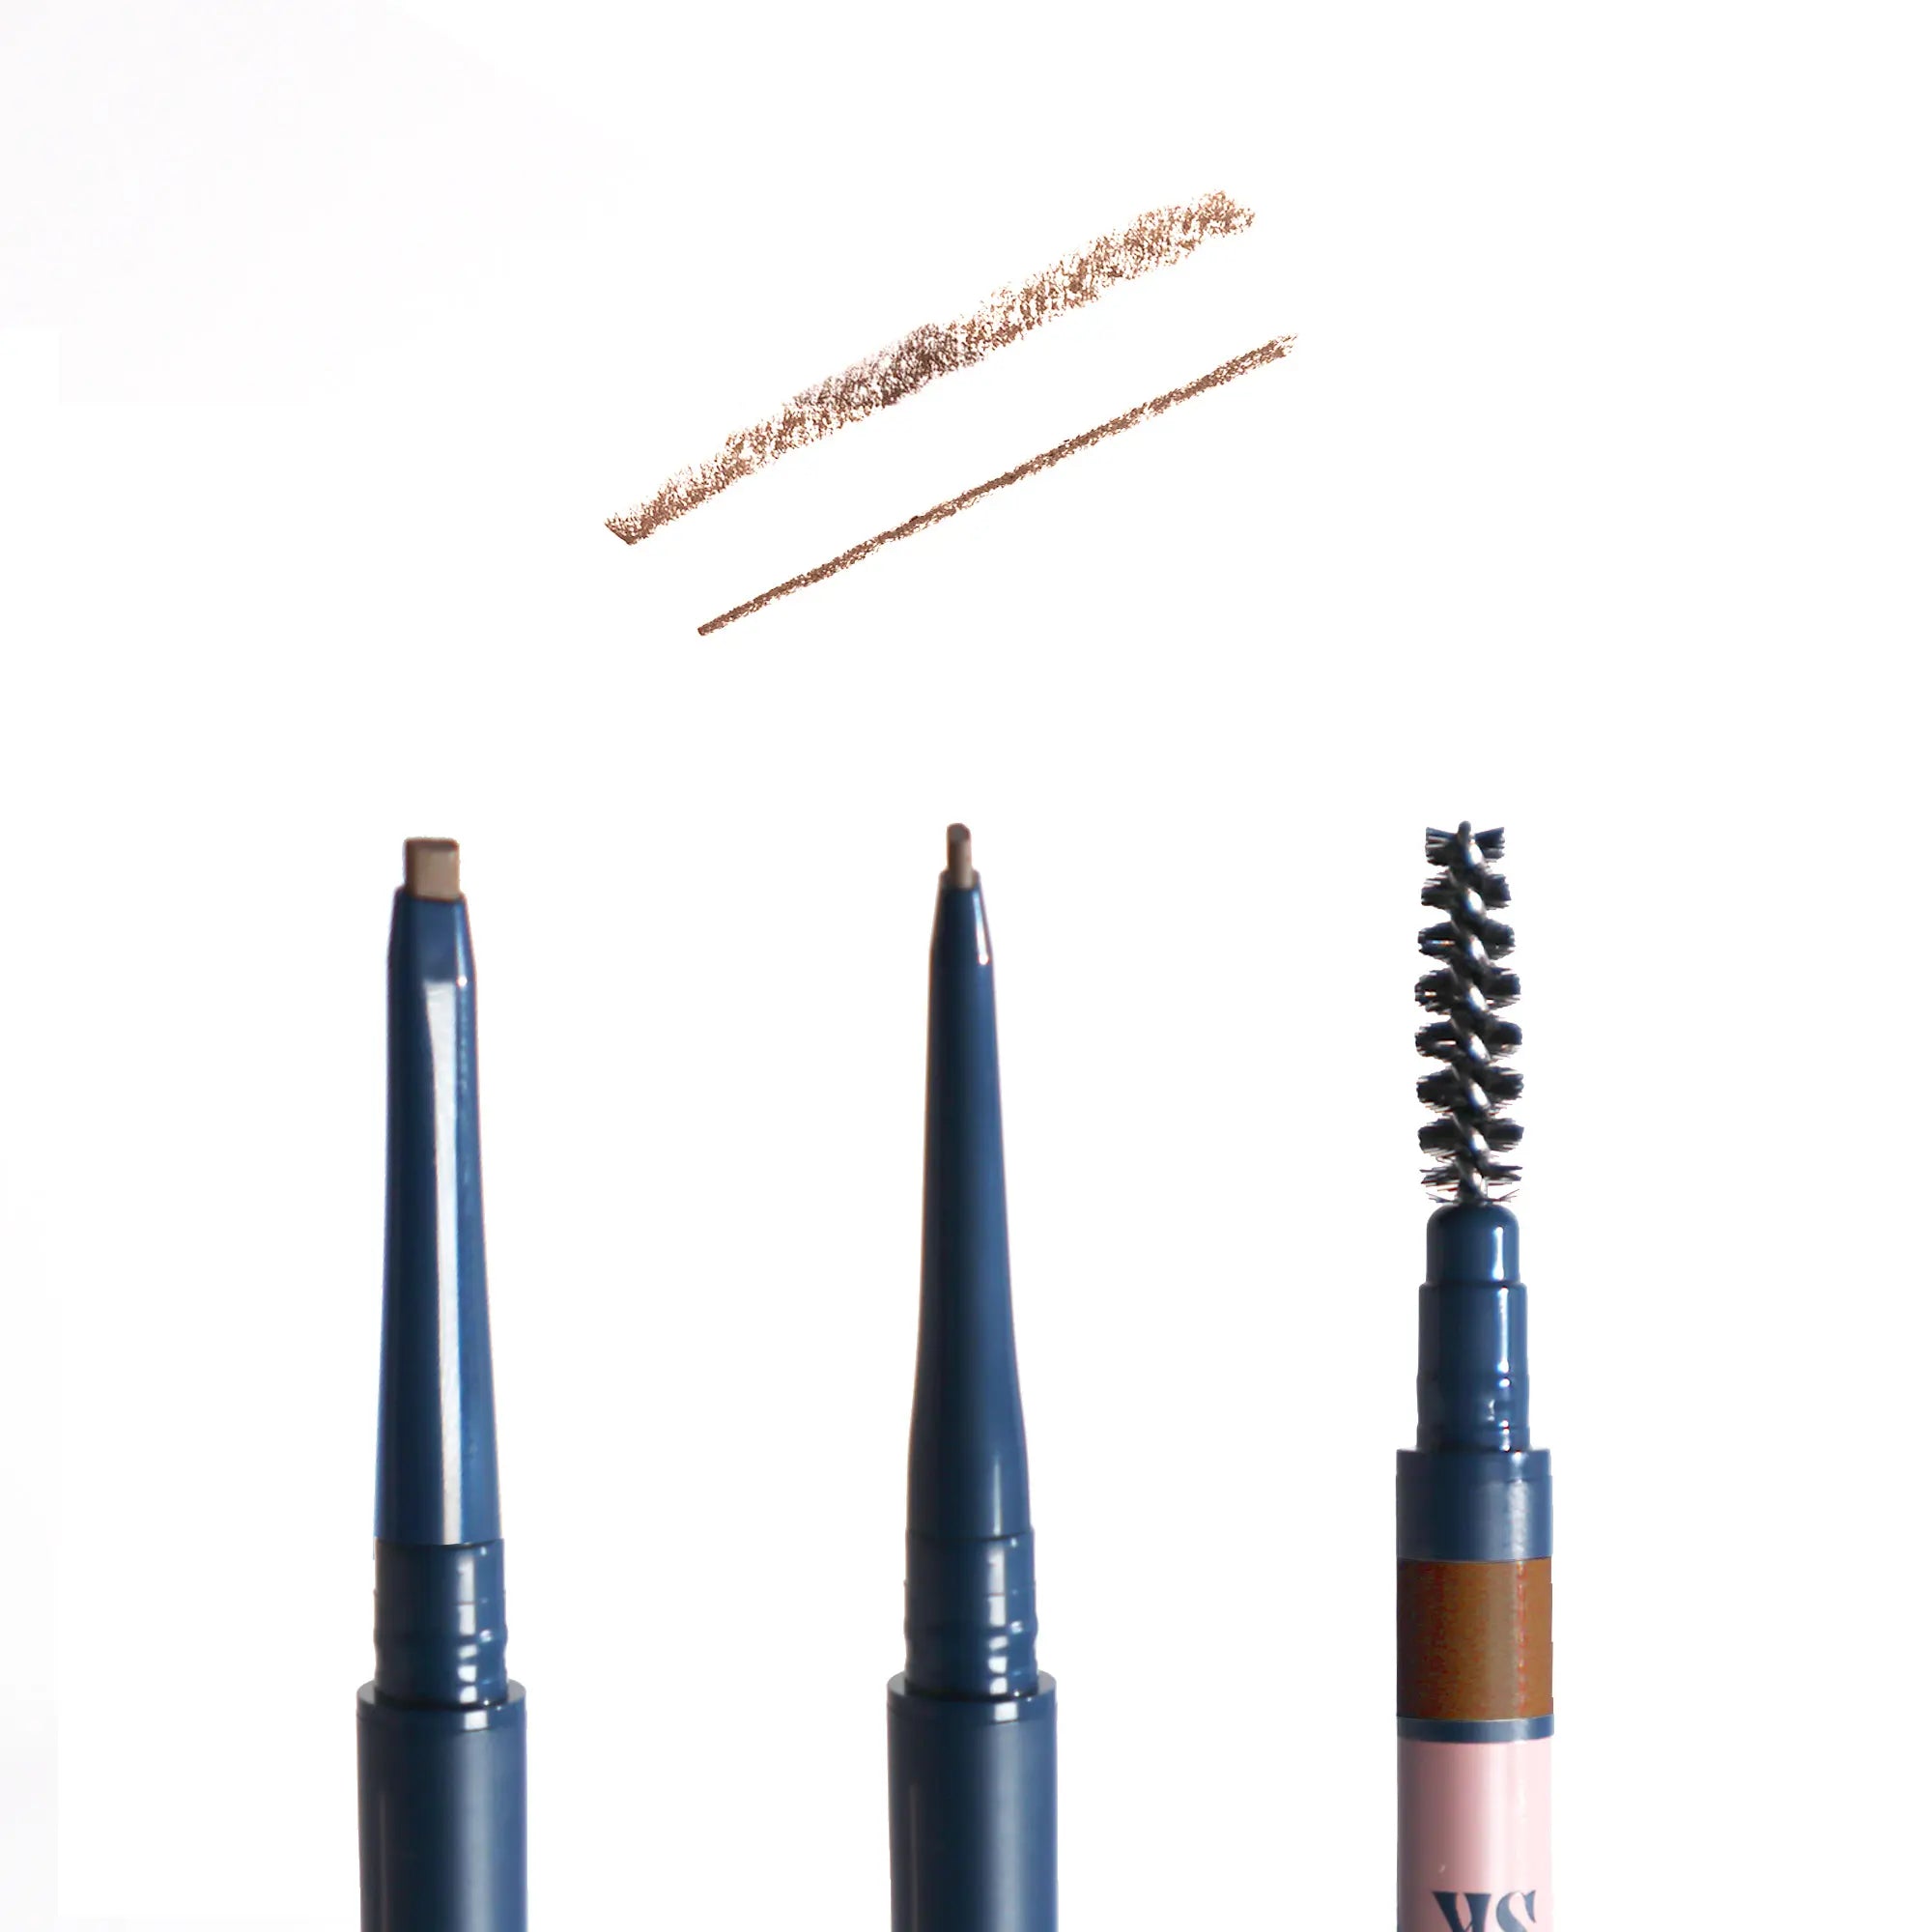 Brow Pencil - Medium Brown 'Can't Do Without You'